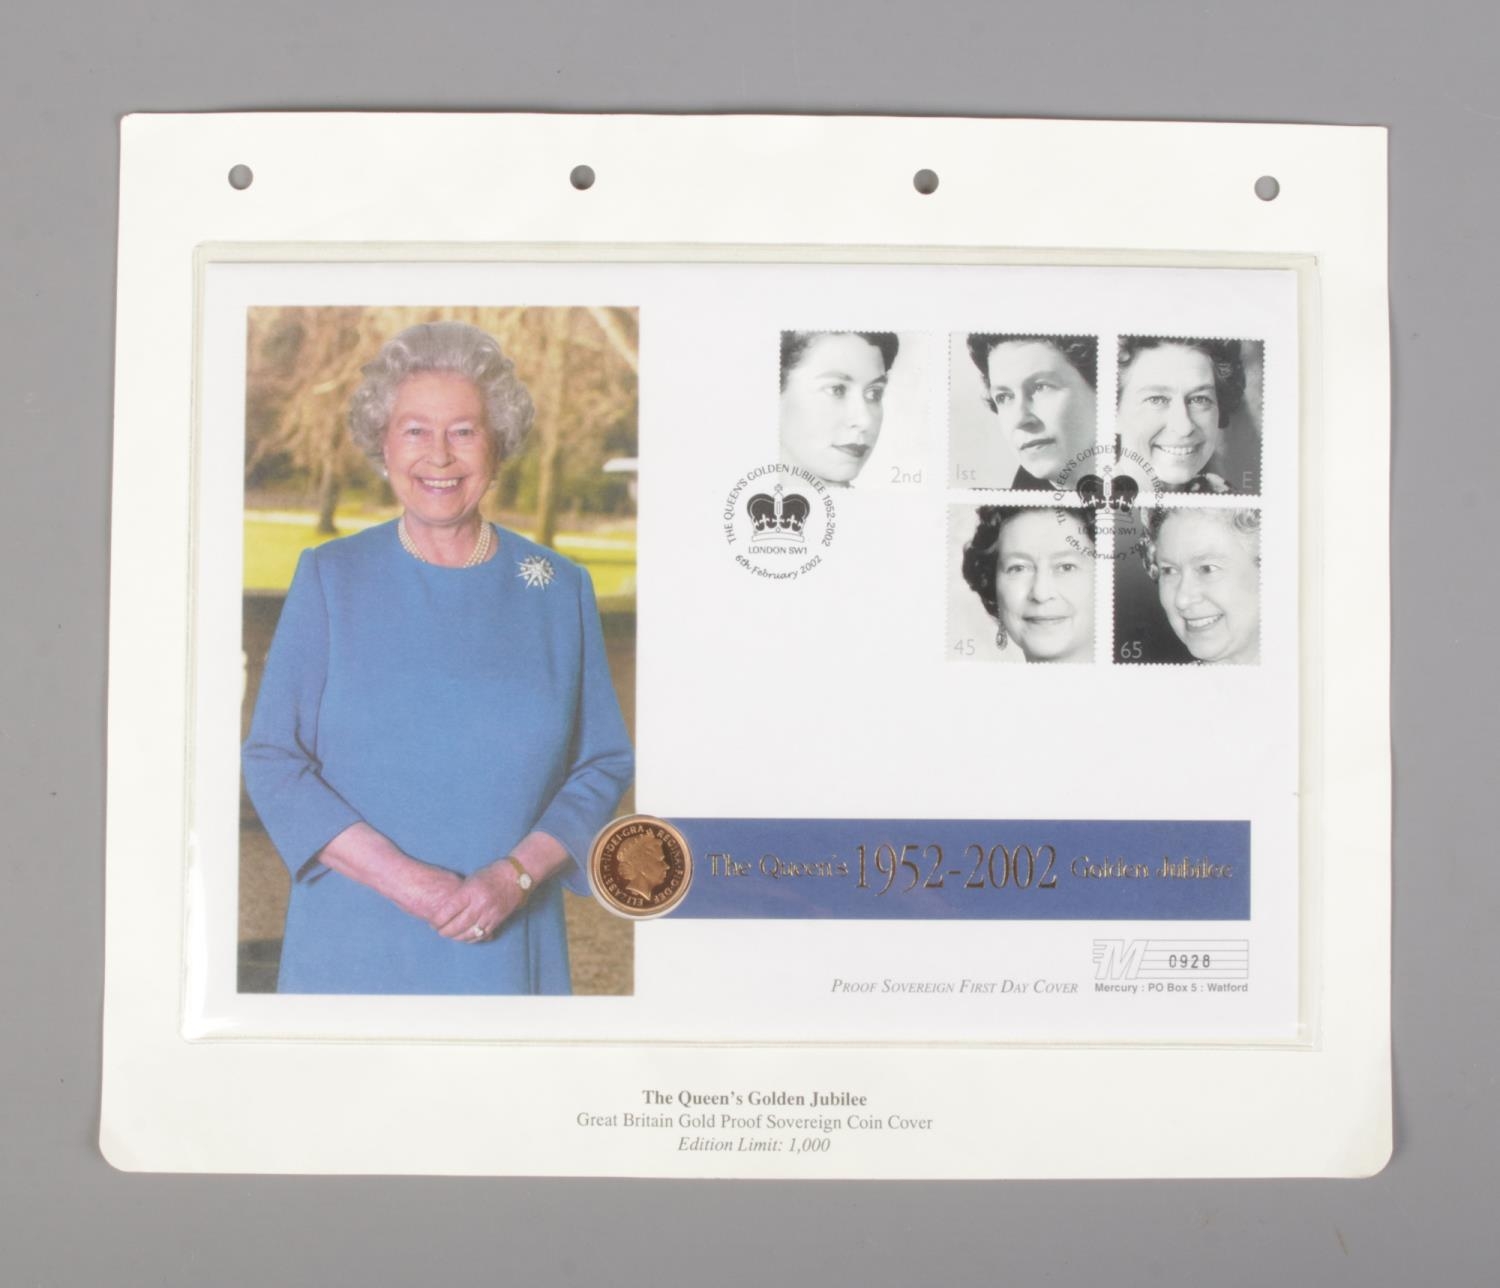 A limited edition The Queens 1952-2002 Golden Jubilee proof 22ct gold sovereign first day cover coin